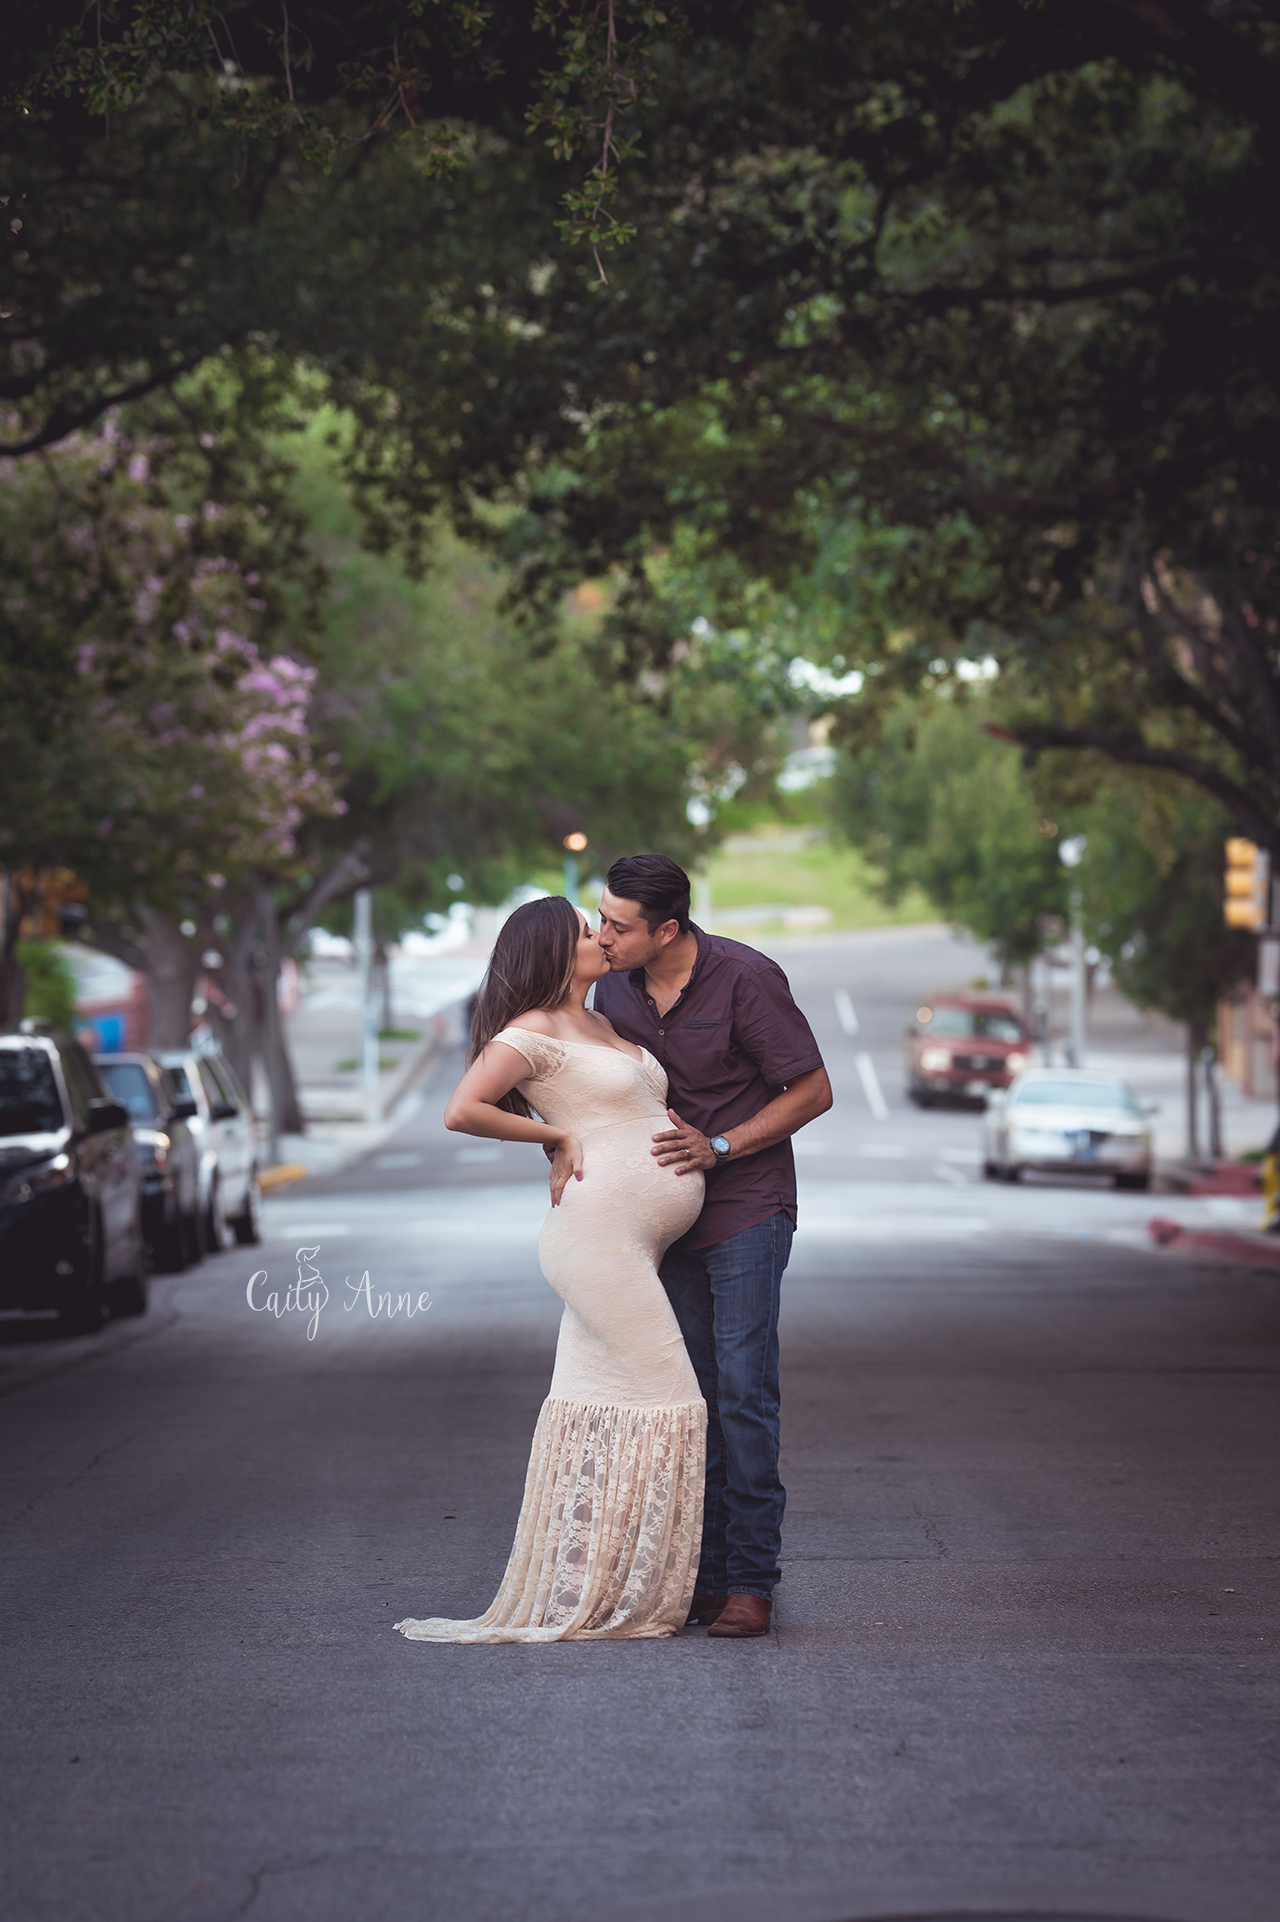 maternity photoshoot poses for couples image 